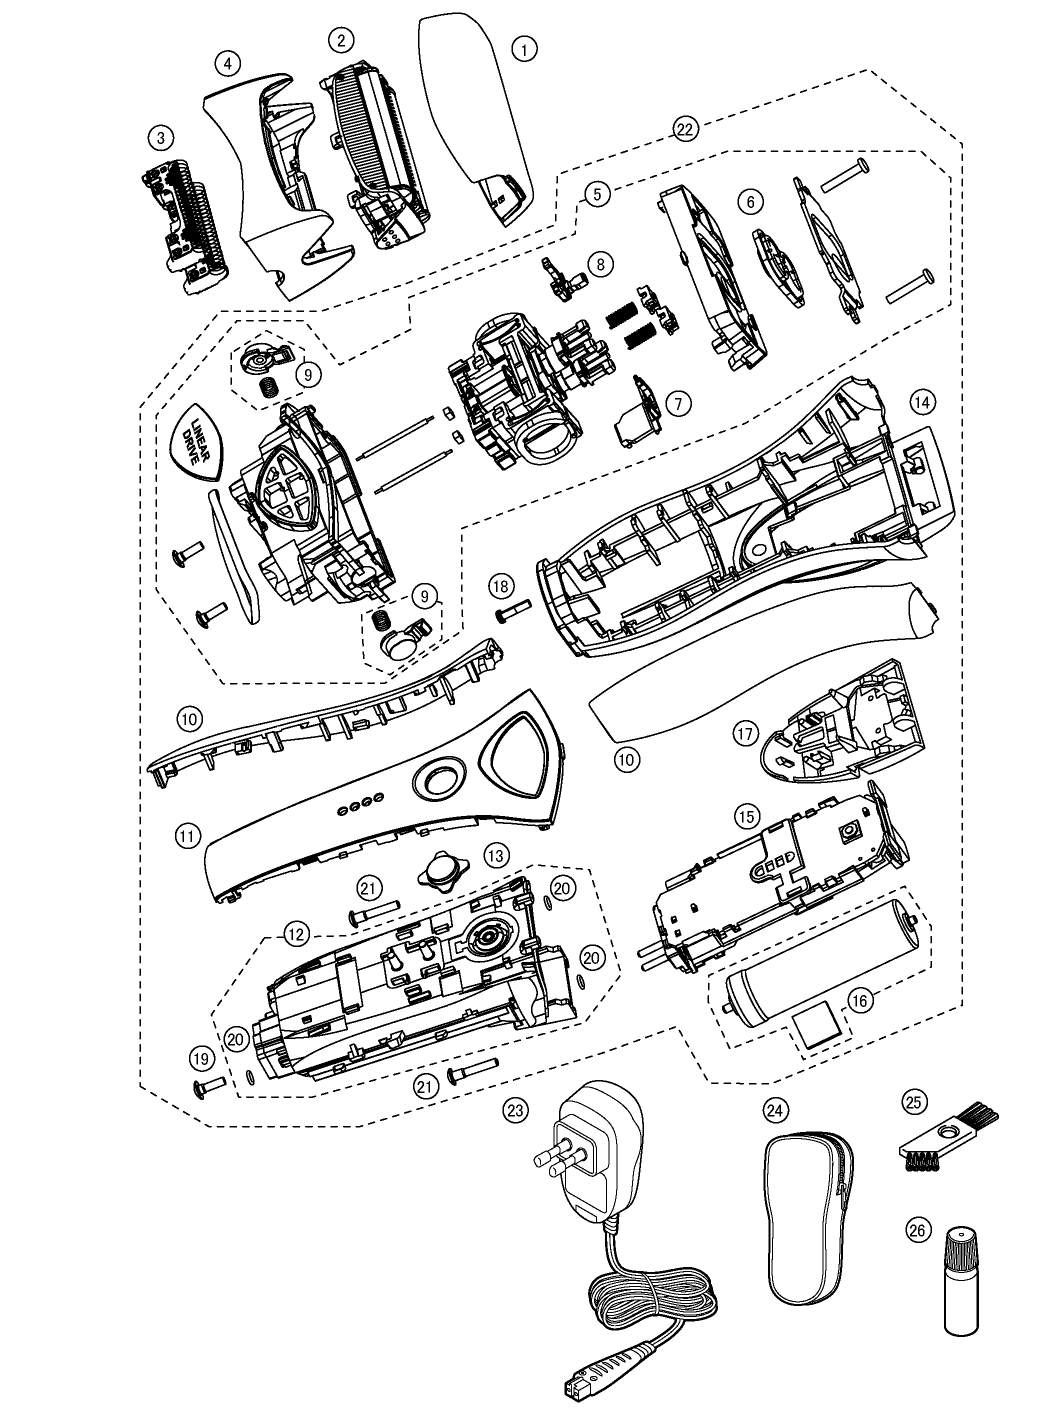 ES-8813: Exploded View